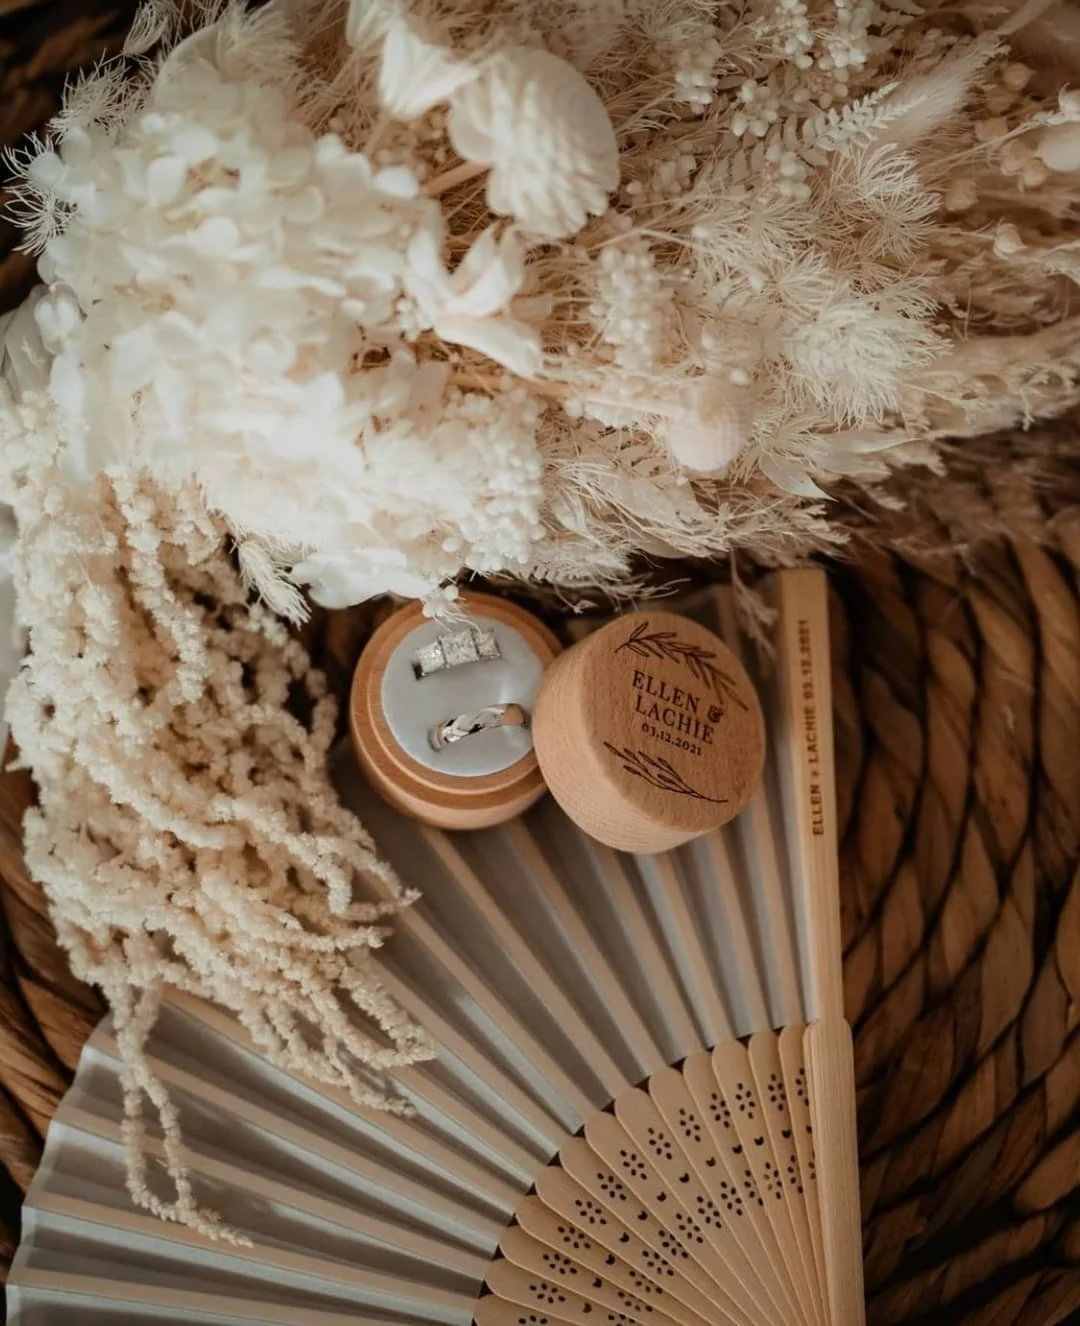 autumn-wedding-ideas-engraved-ring-box-and-fan-Personalised-Favours-photo-ellen-p-faith